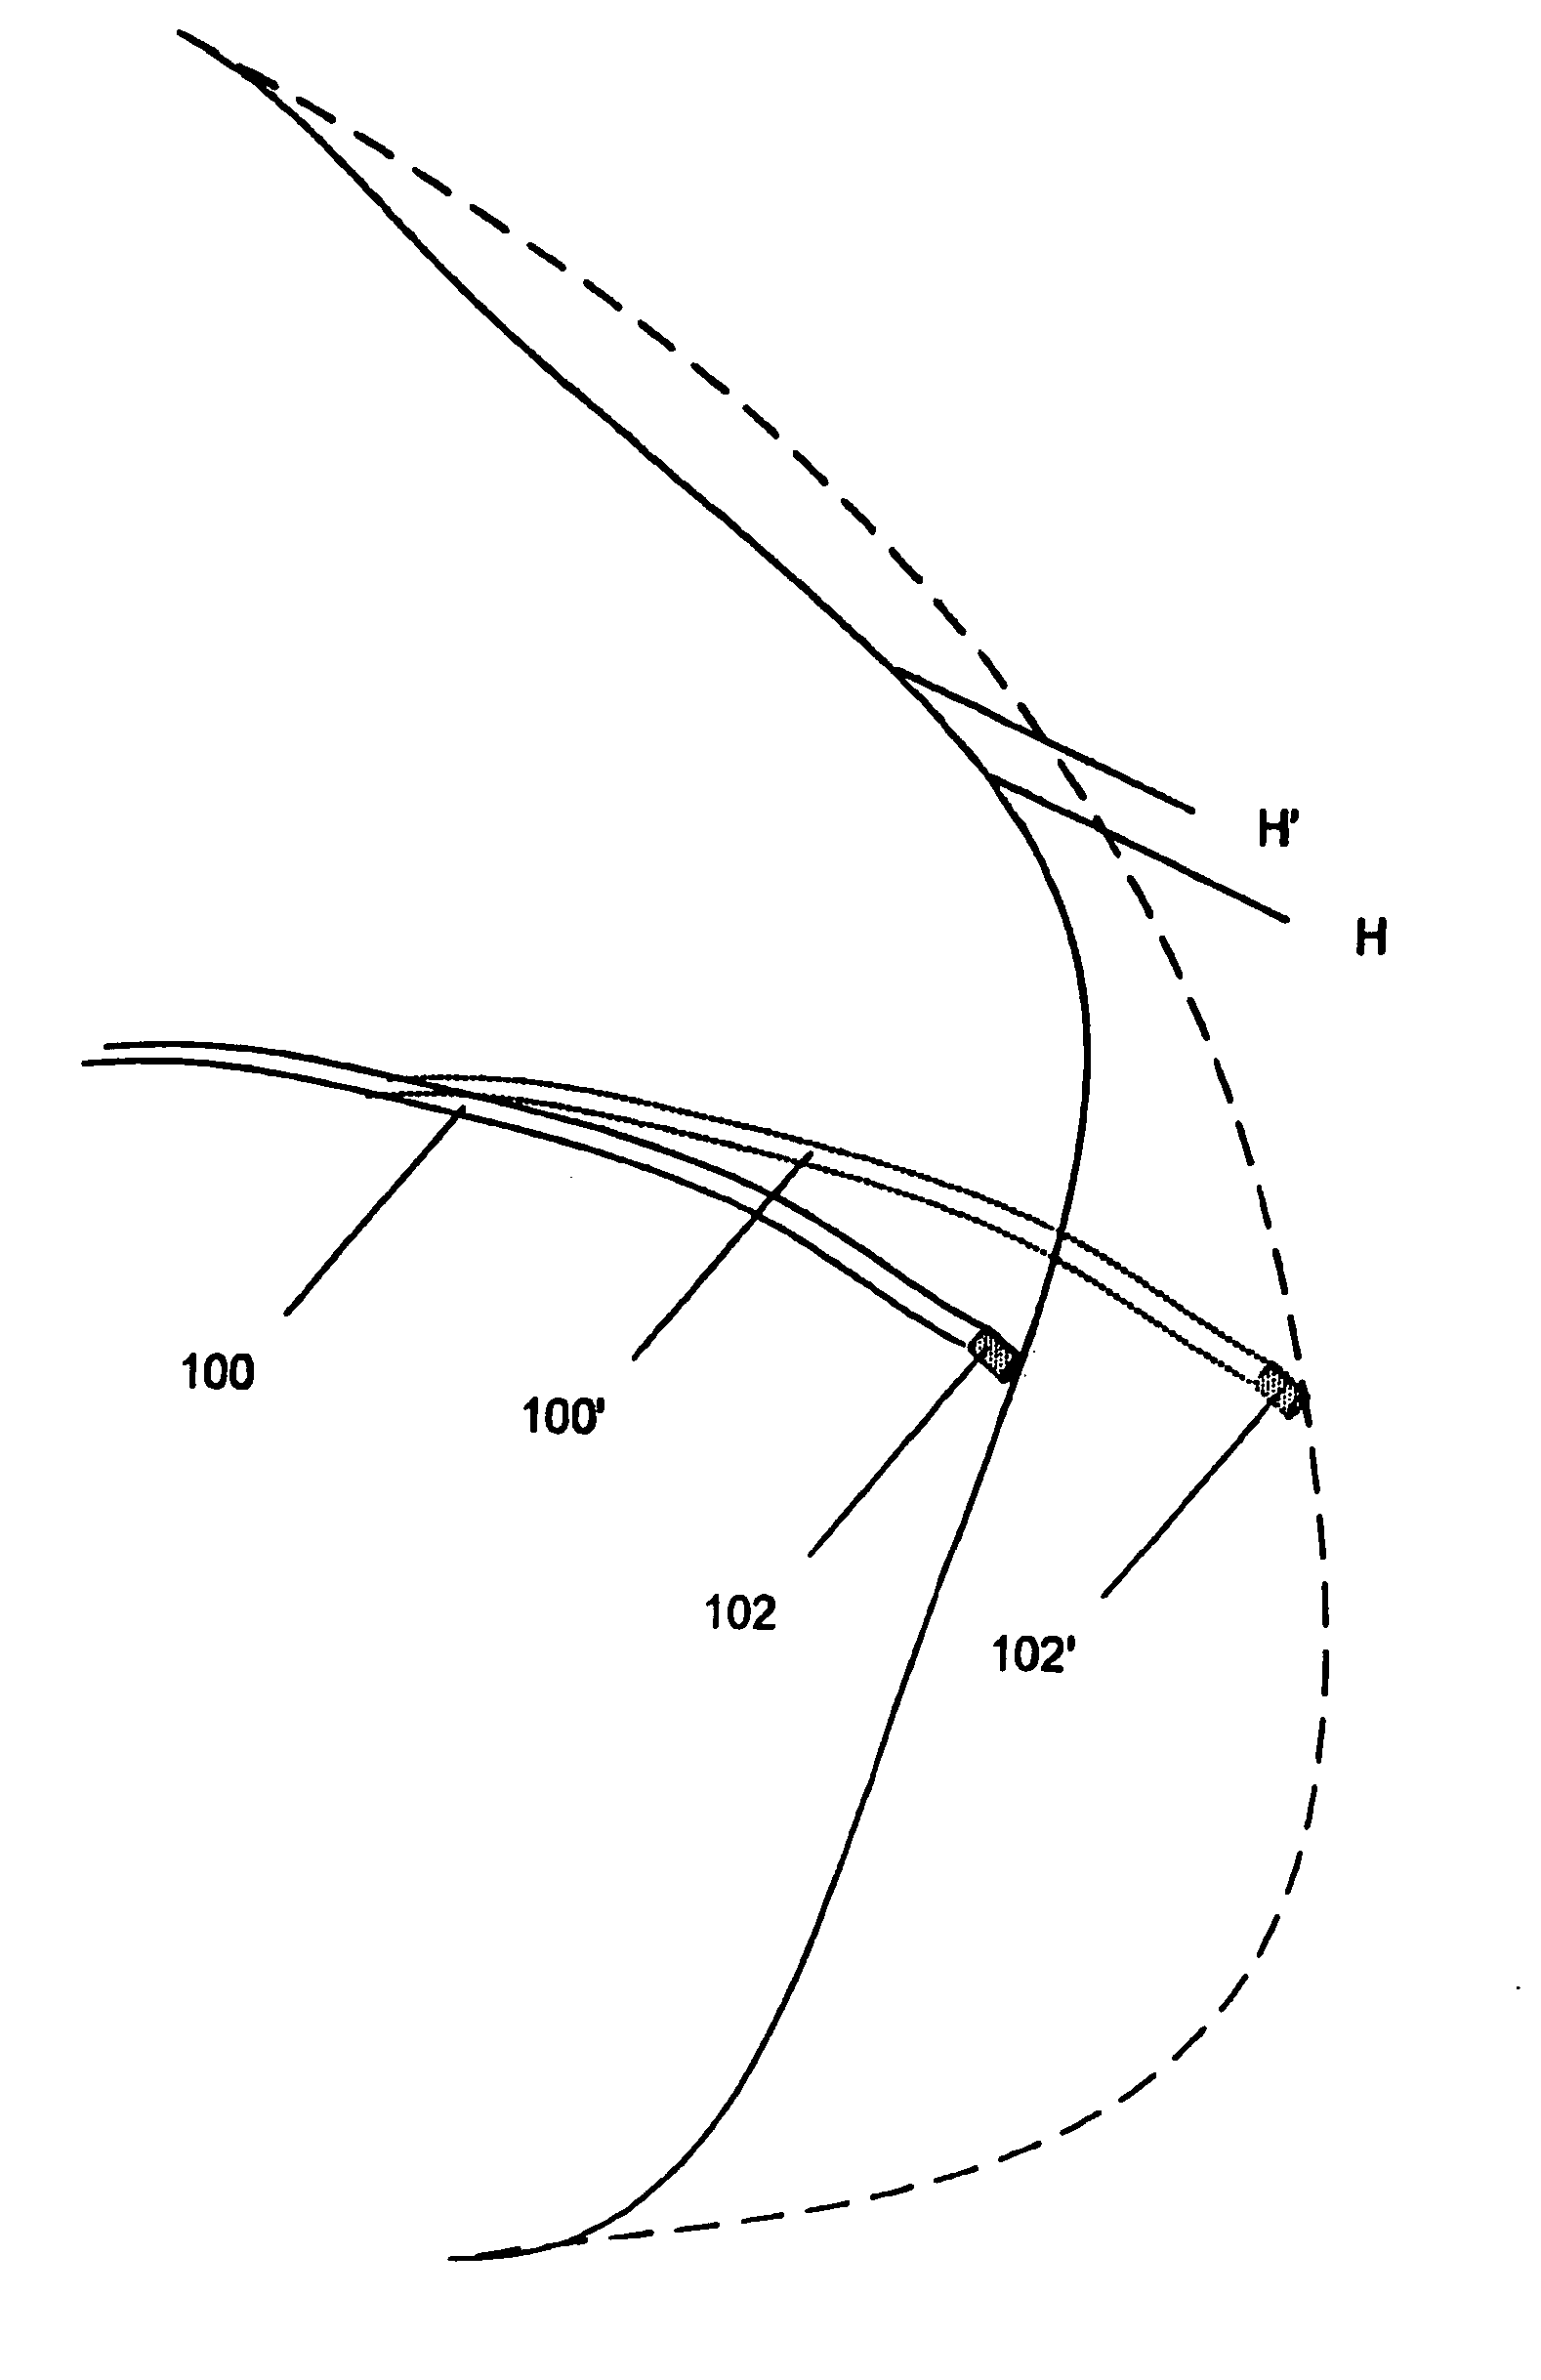 Electrophysiology catheter and system for gentle and firm wall contact